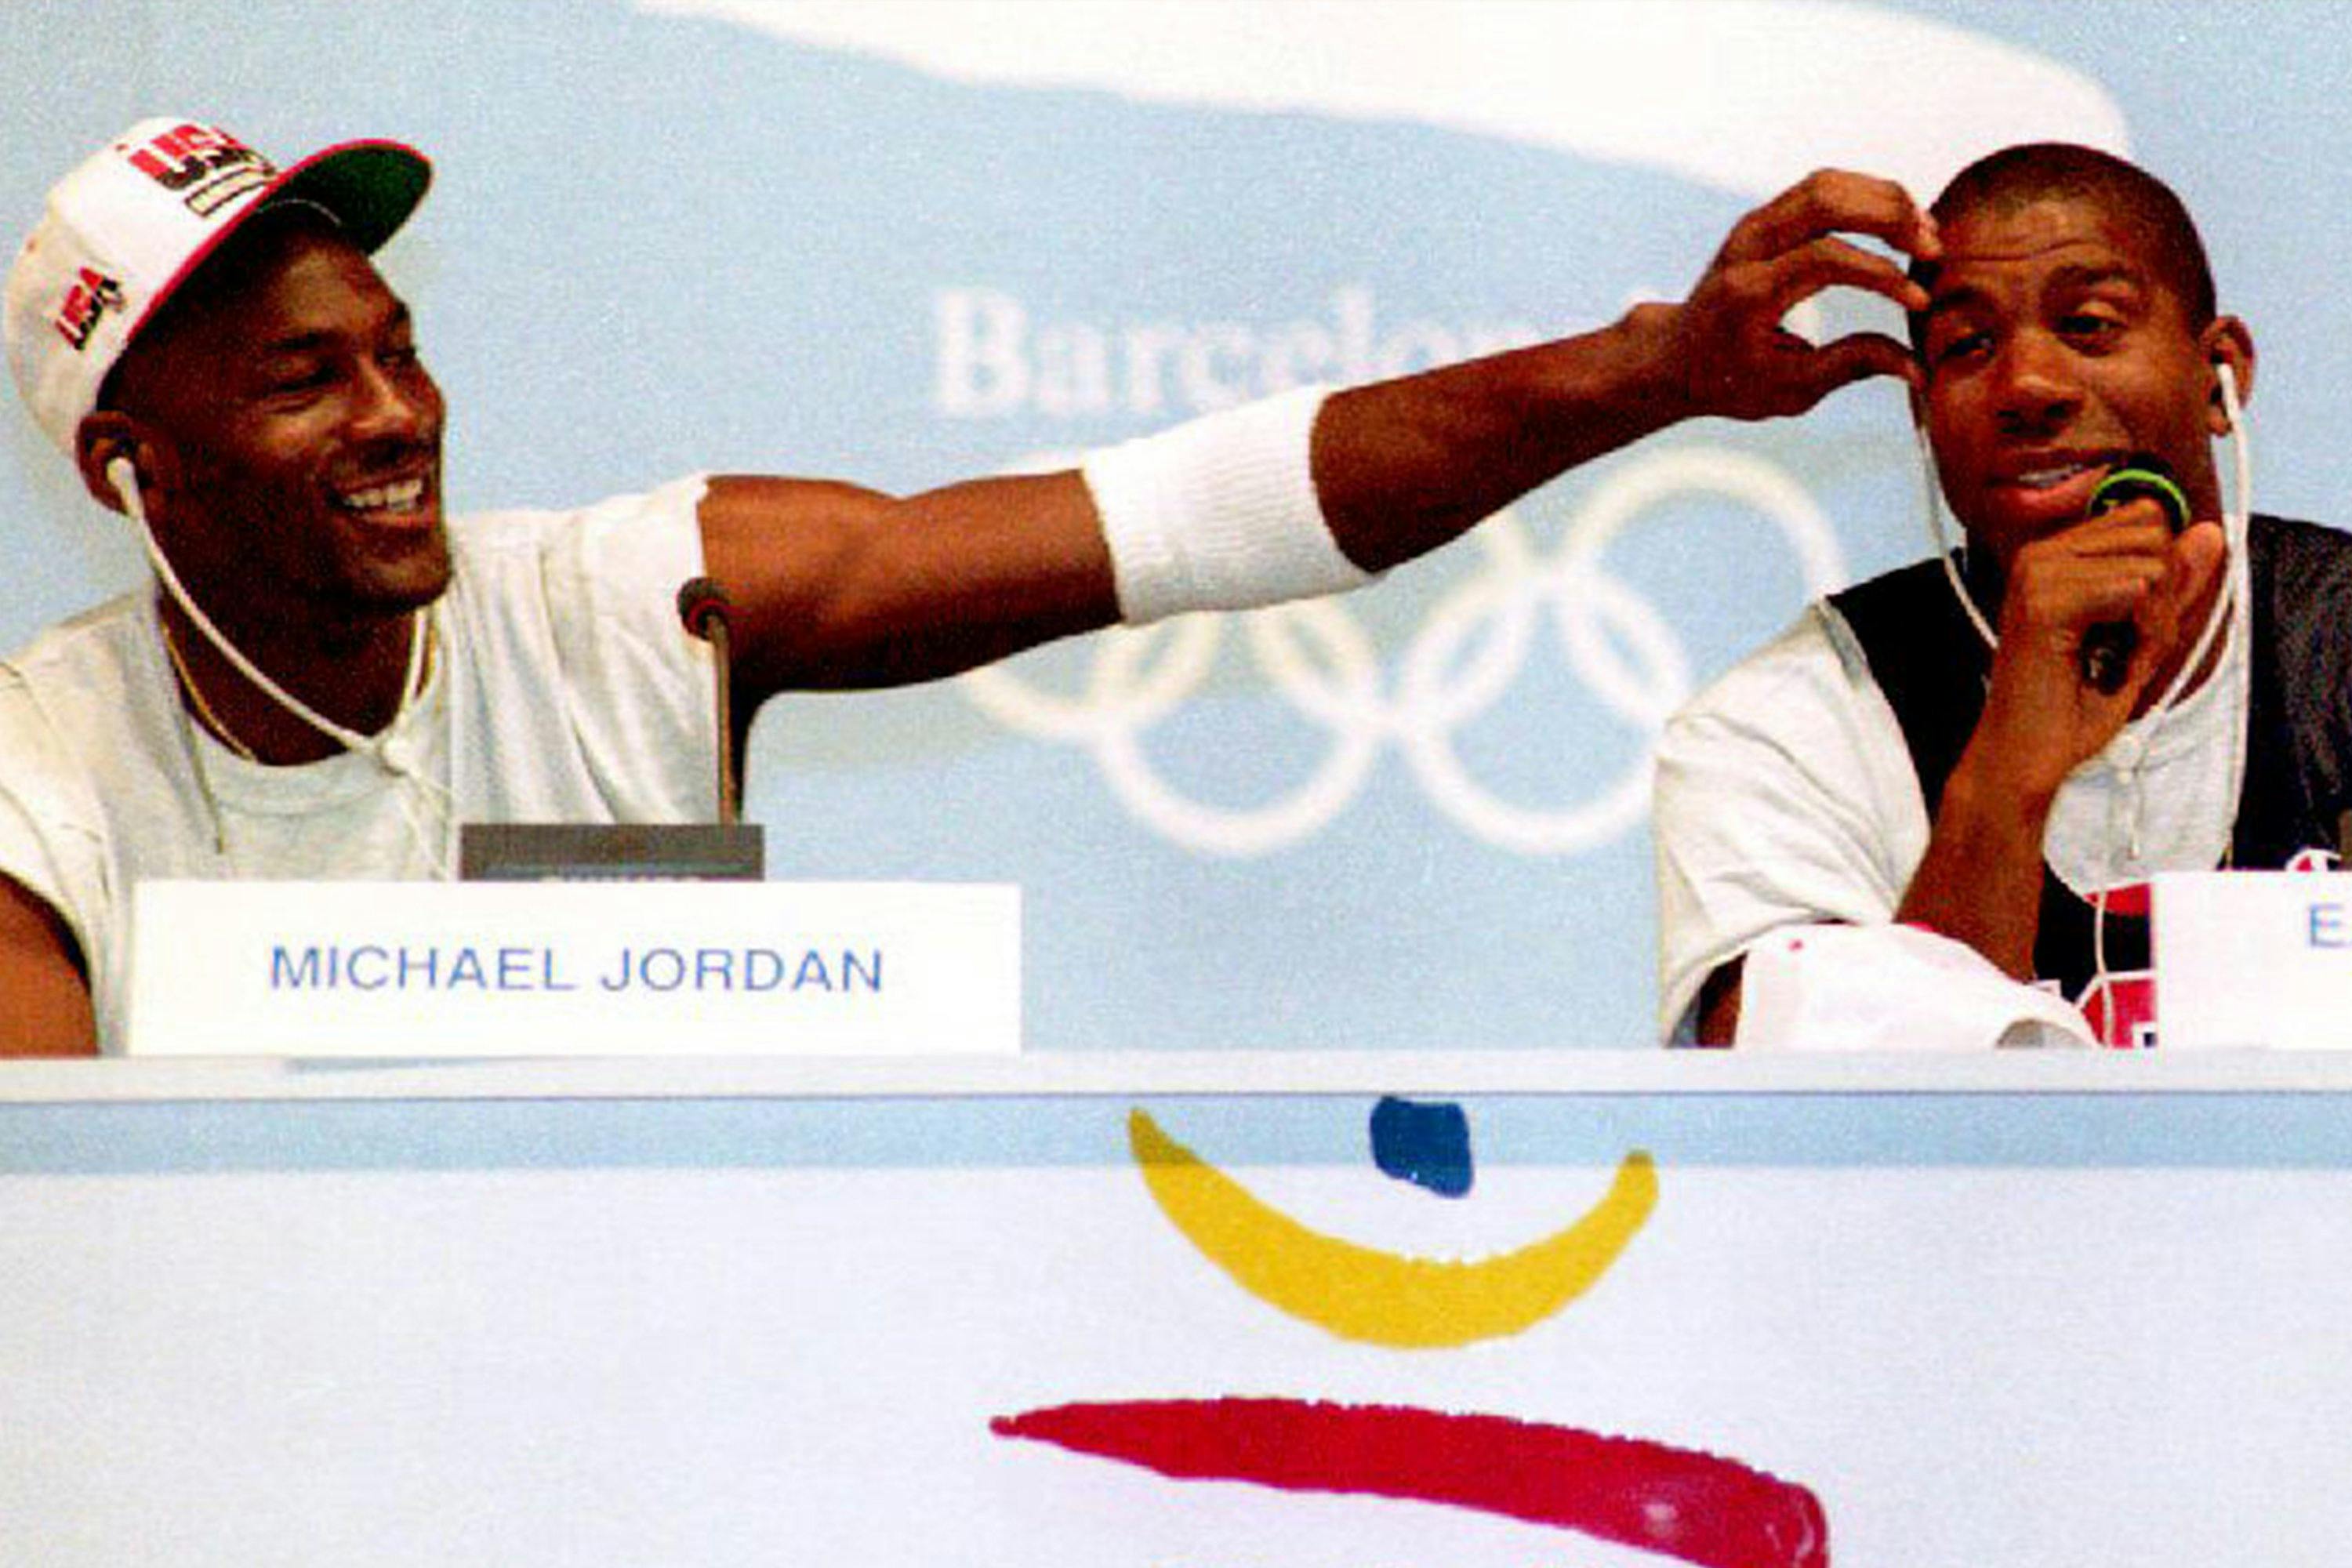 Michael Jordan and Earvin “Magic” Johnson during a press conference for the U.S. Olympic “Dream Team.